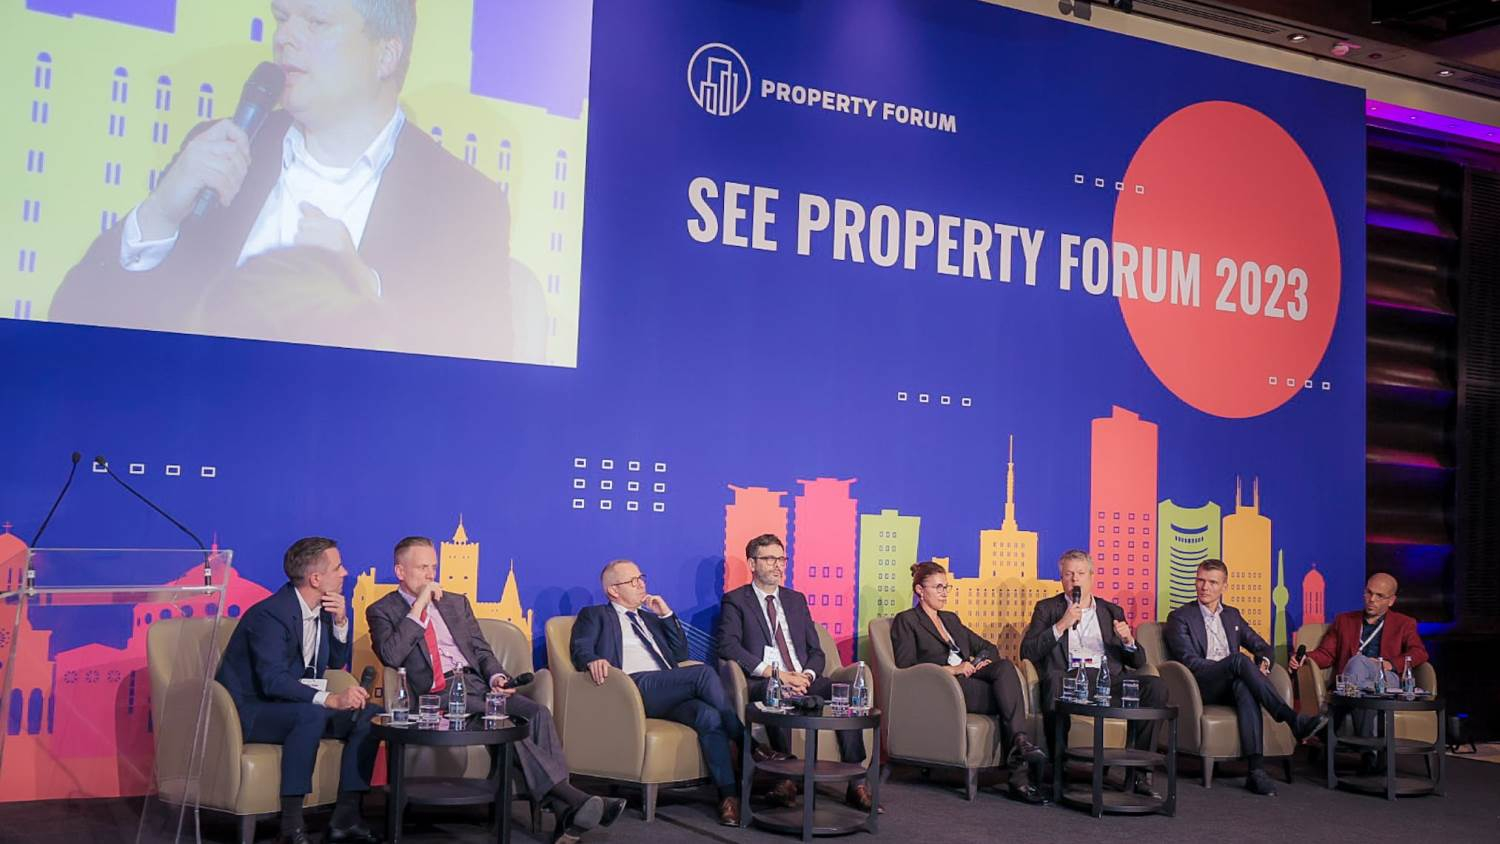 News Article investment report Romania SEE Property Forum SEE Property Forum 2023